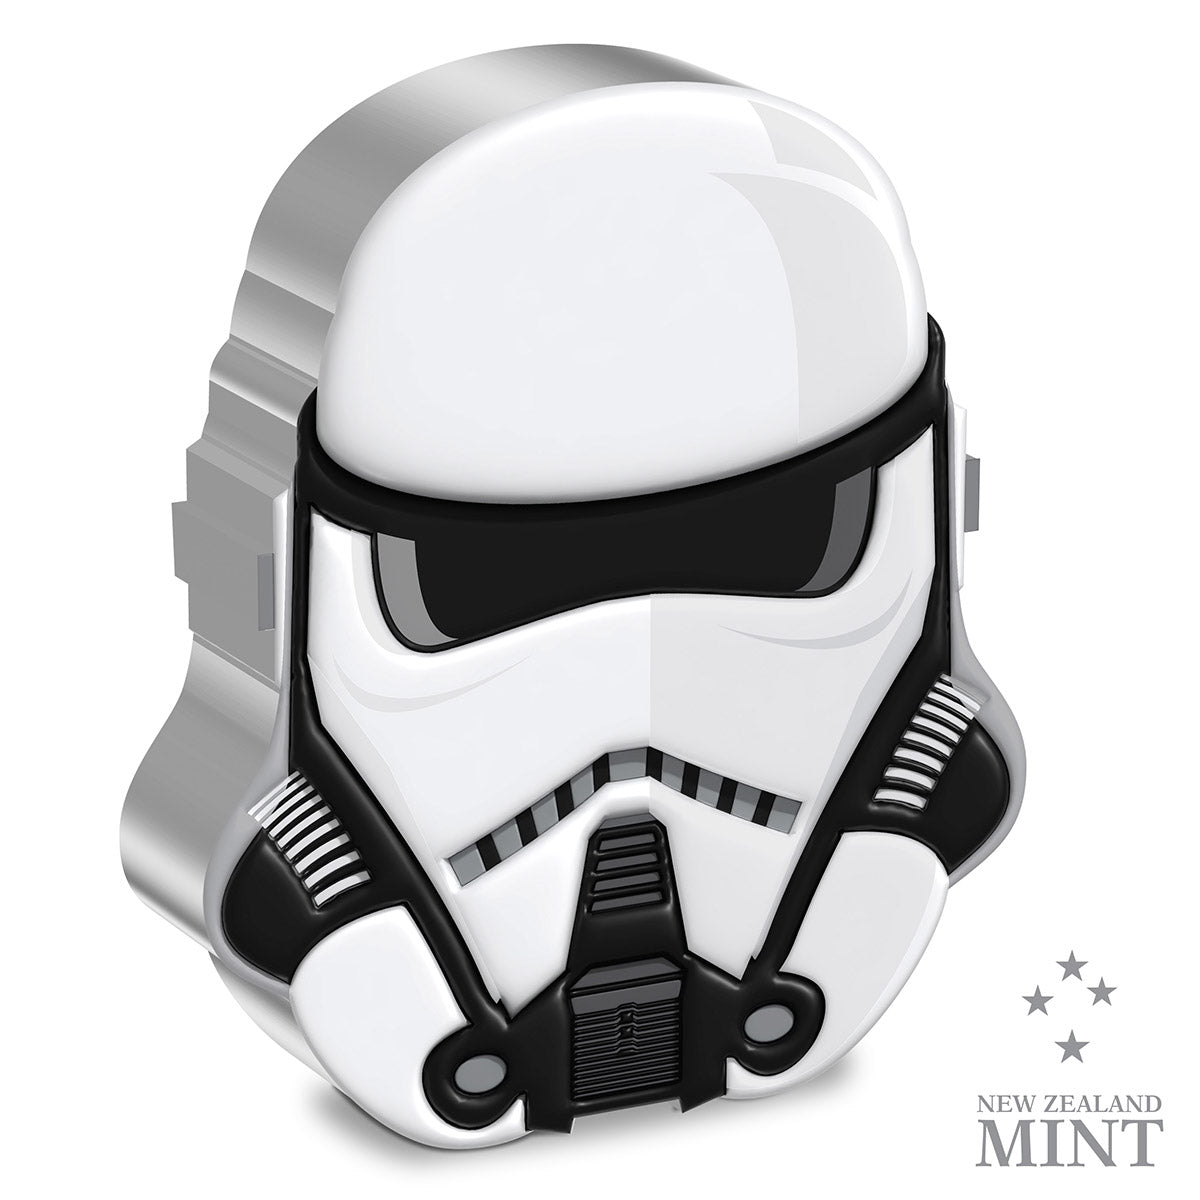 Niue Mint 2021 Faces of the Empire Imperial Patrol Trooper 1 oz Silver Coin